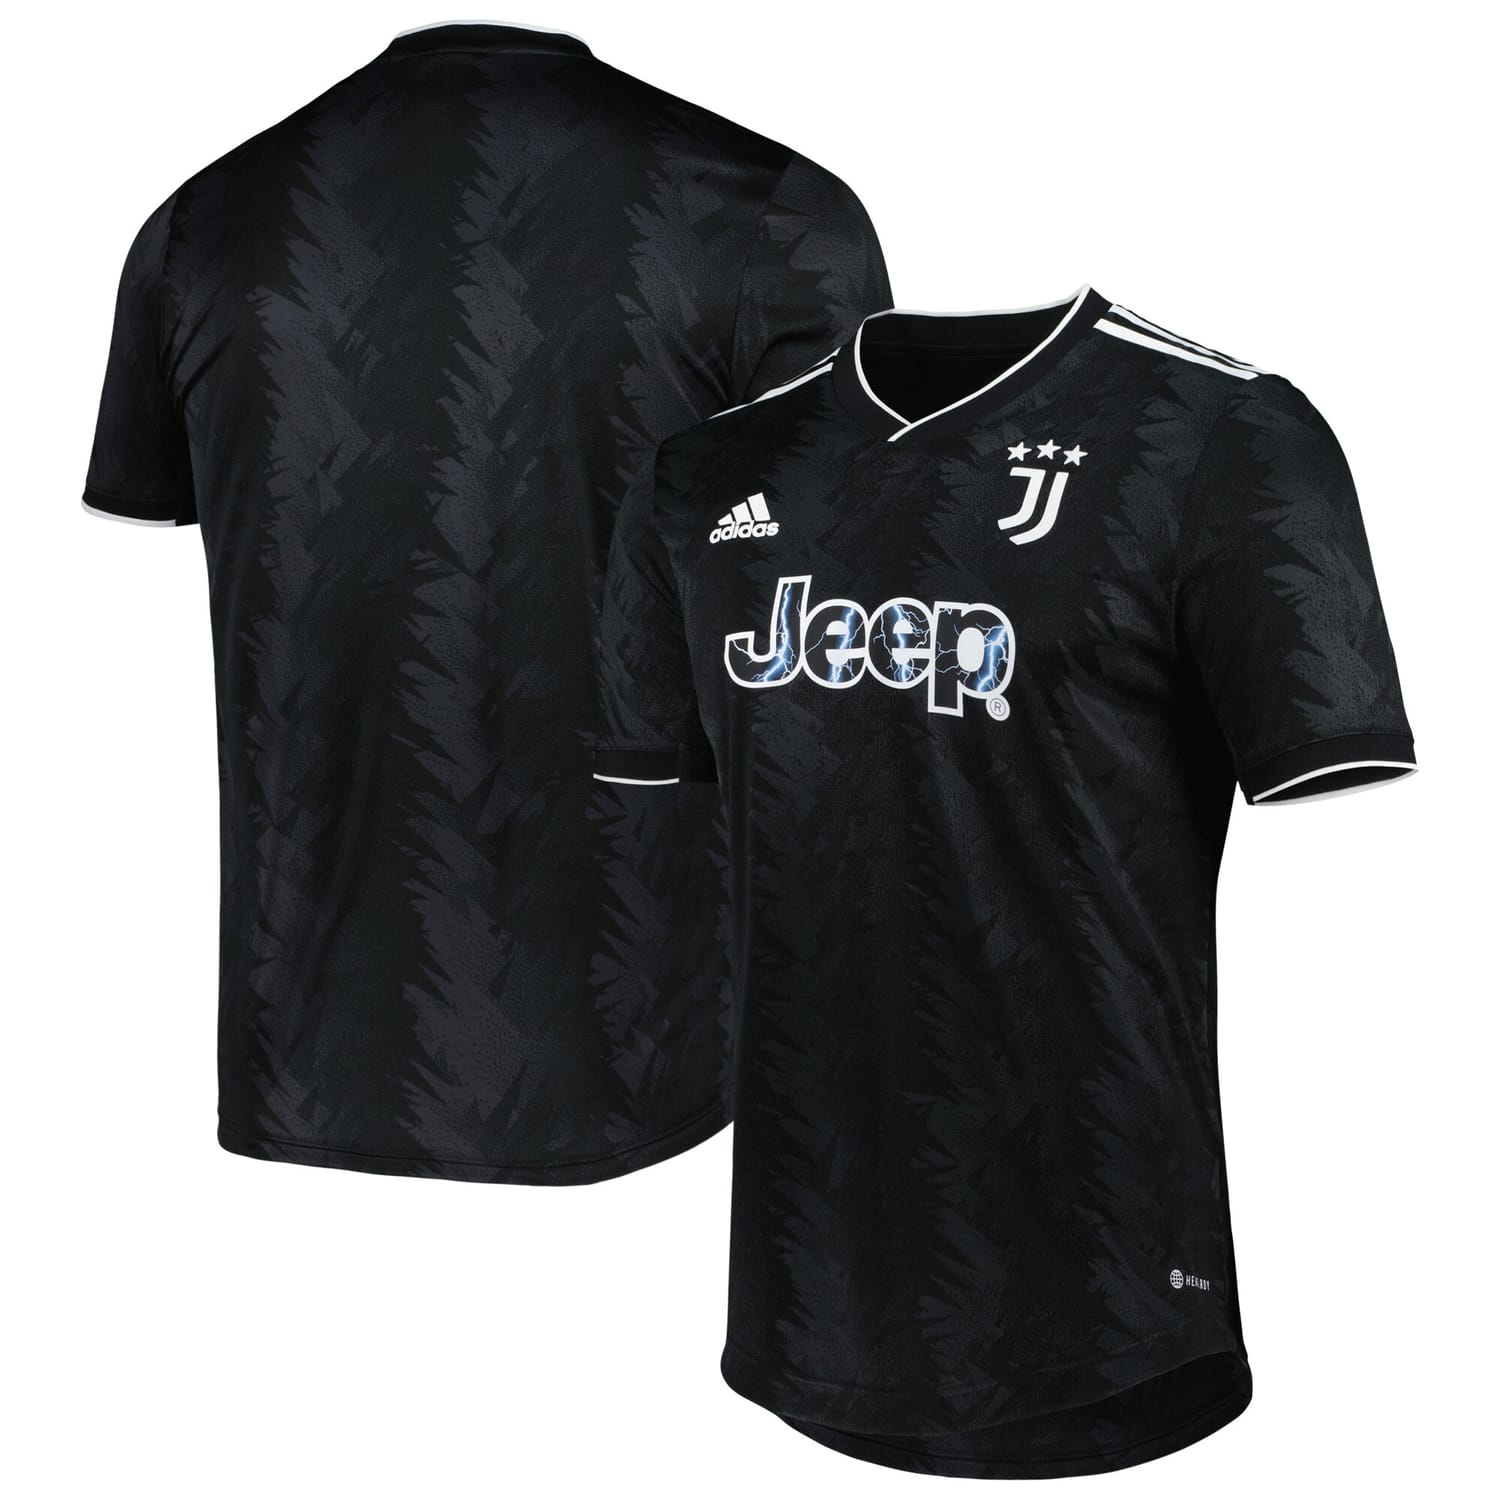 Serie A Juventus Away Authentic Jersey Shirt Black 2022-23 for Men